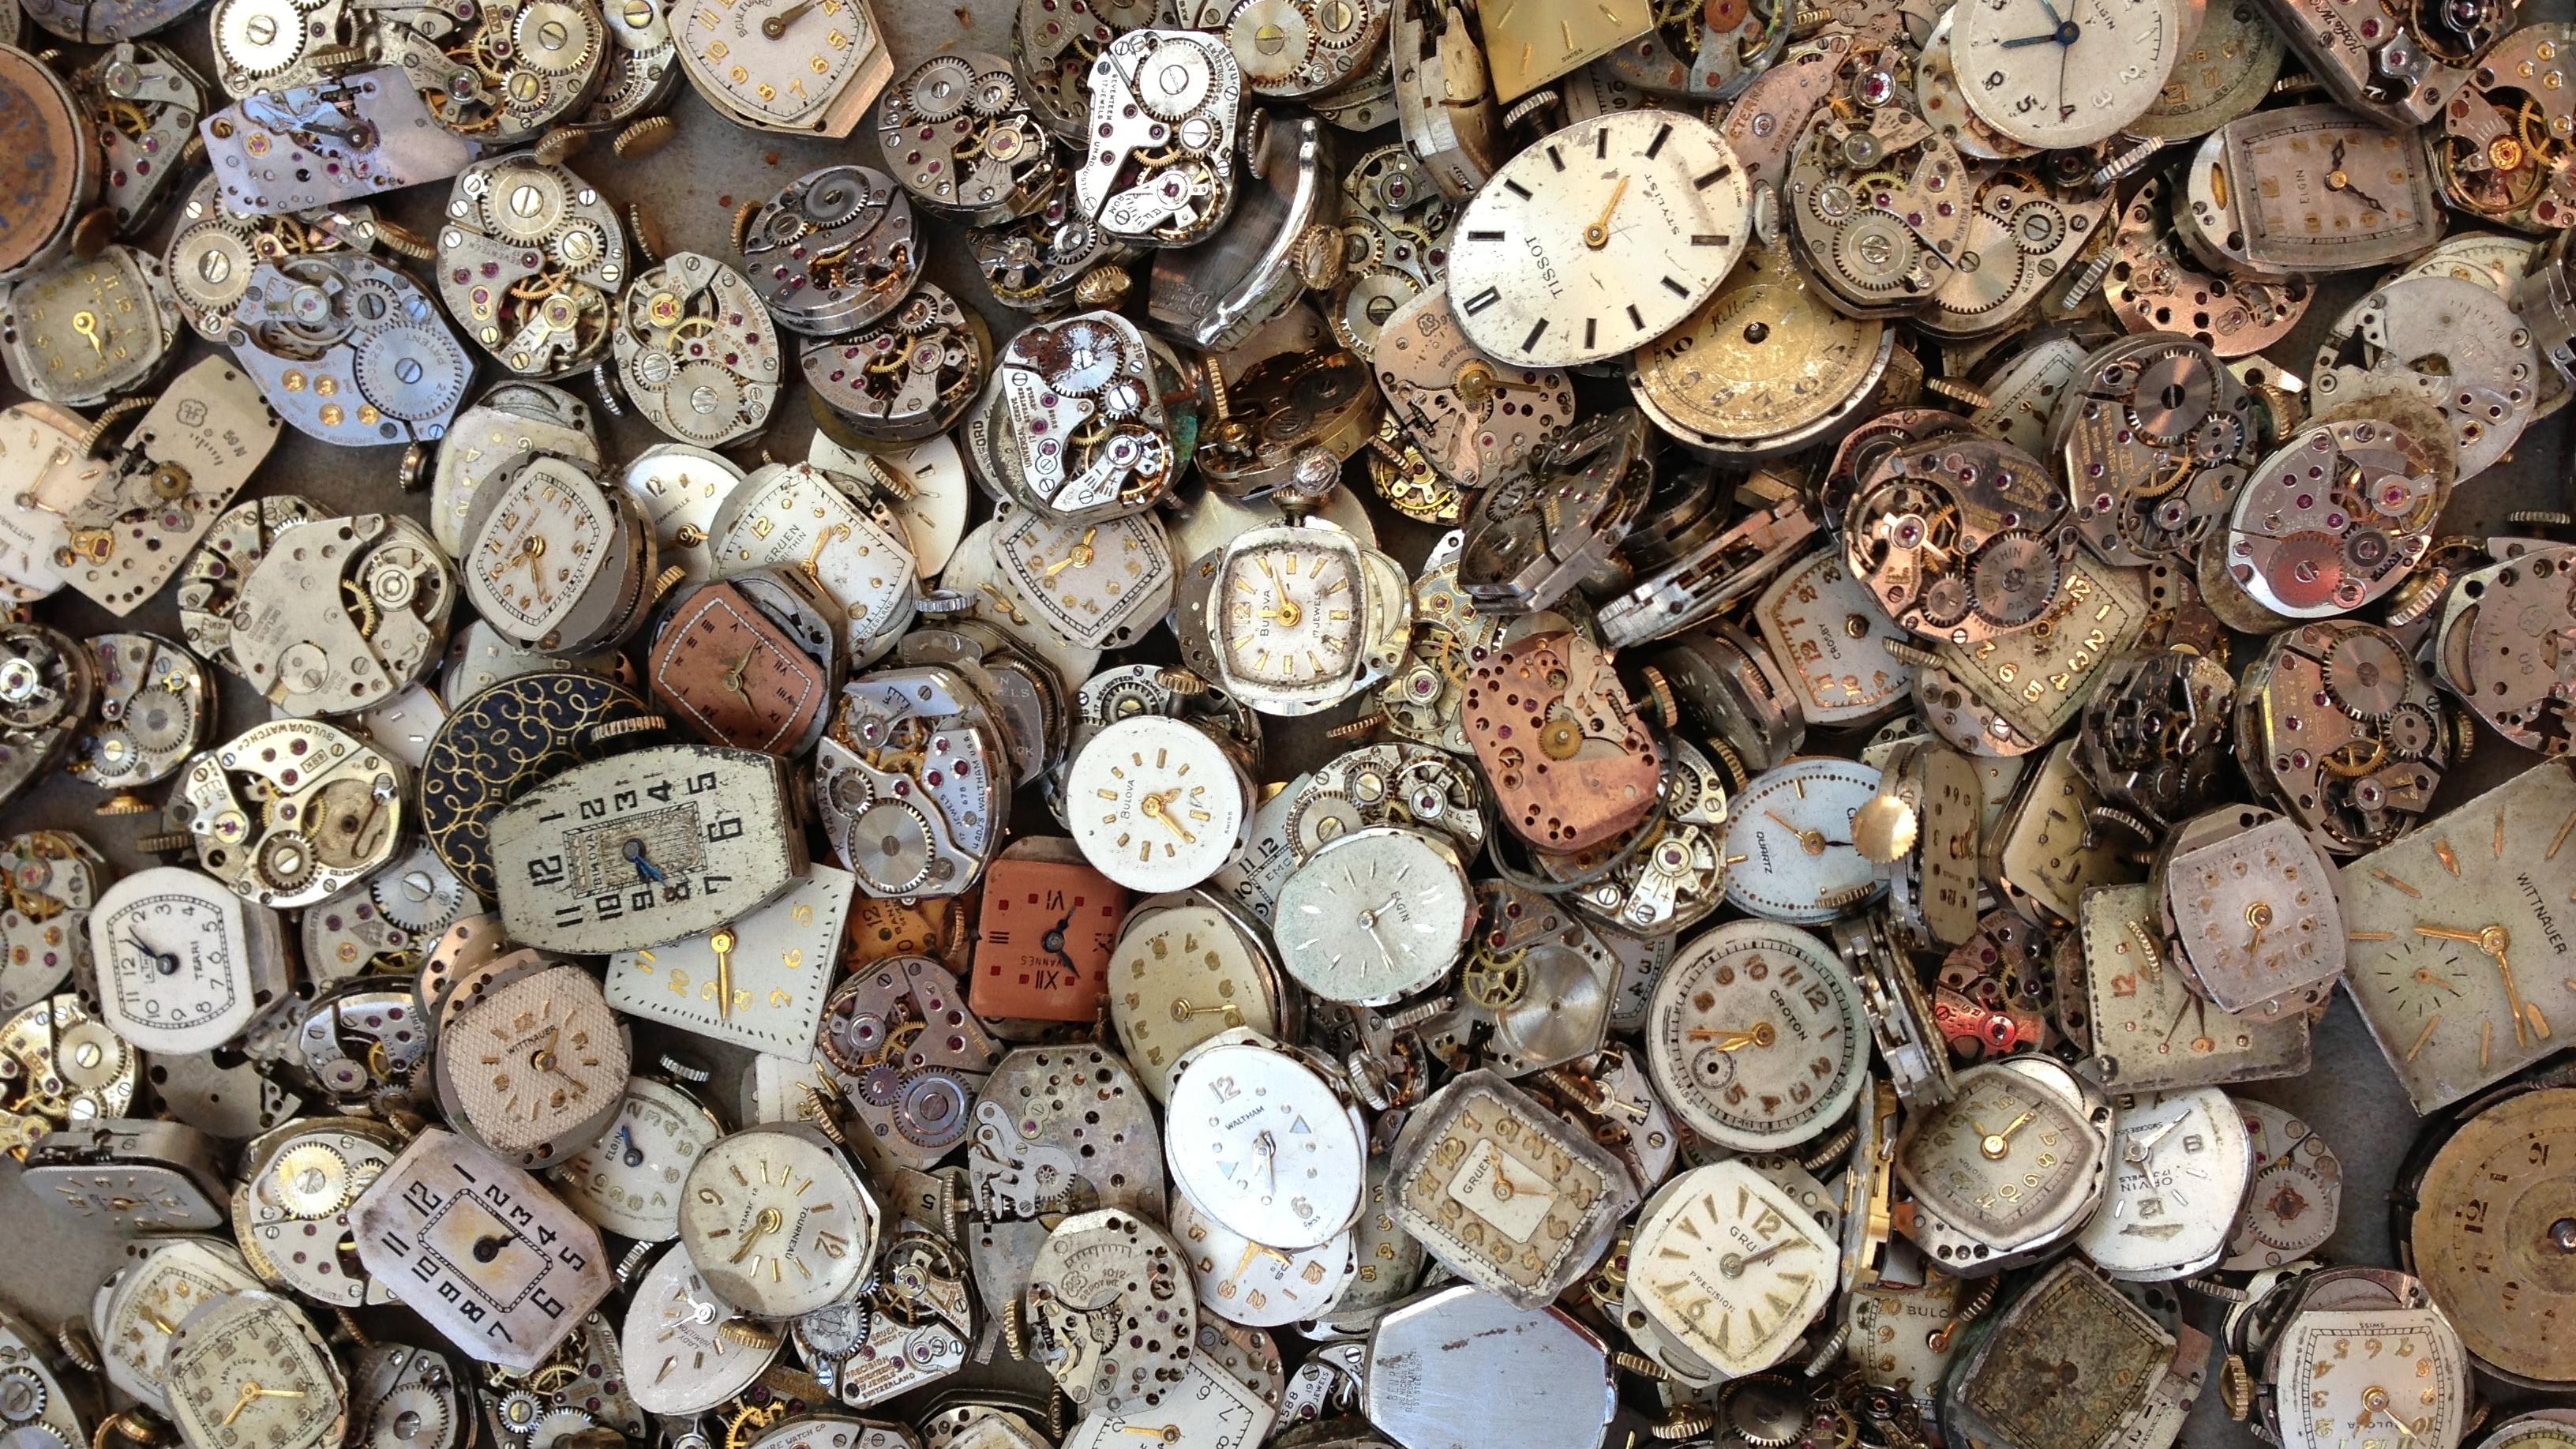 Aerial view of hundreds of clocks piled on top of each other